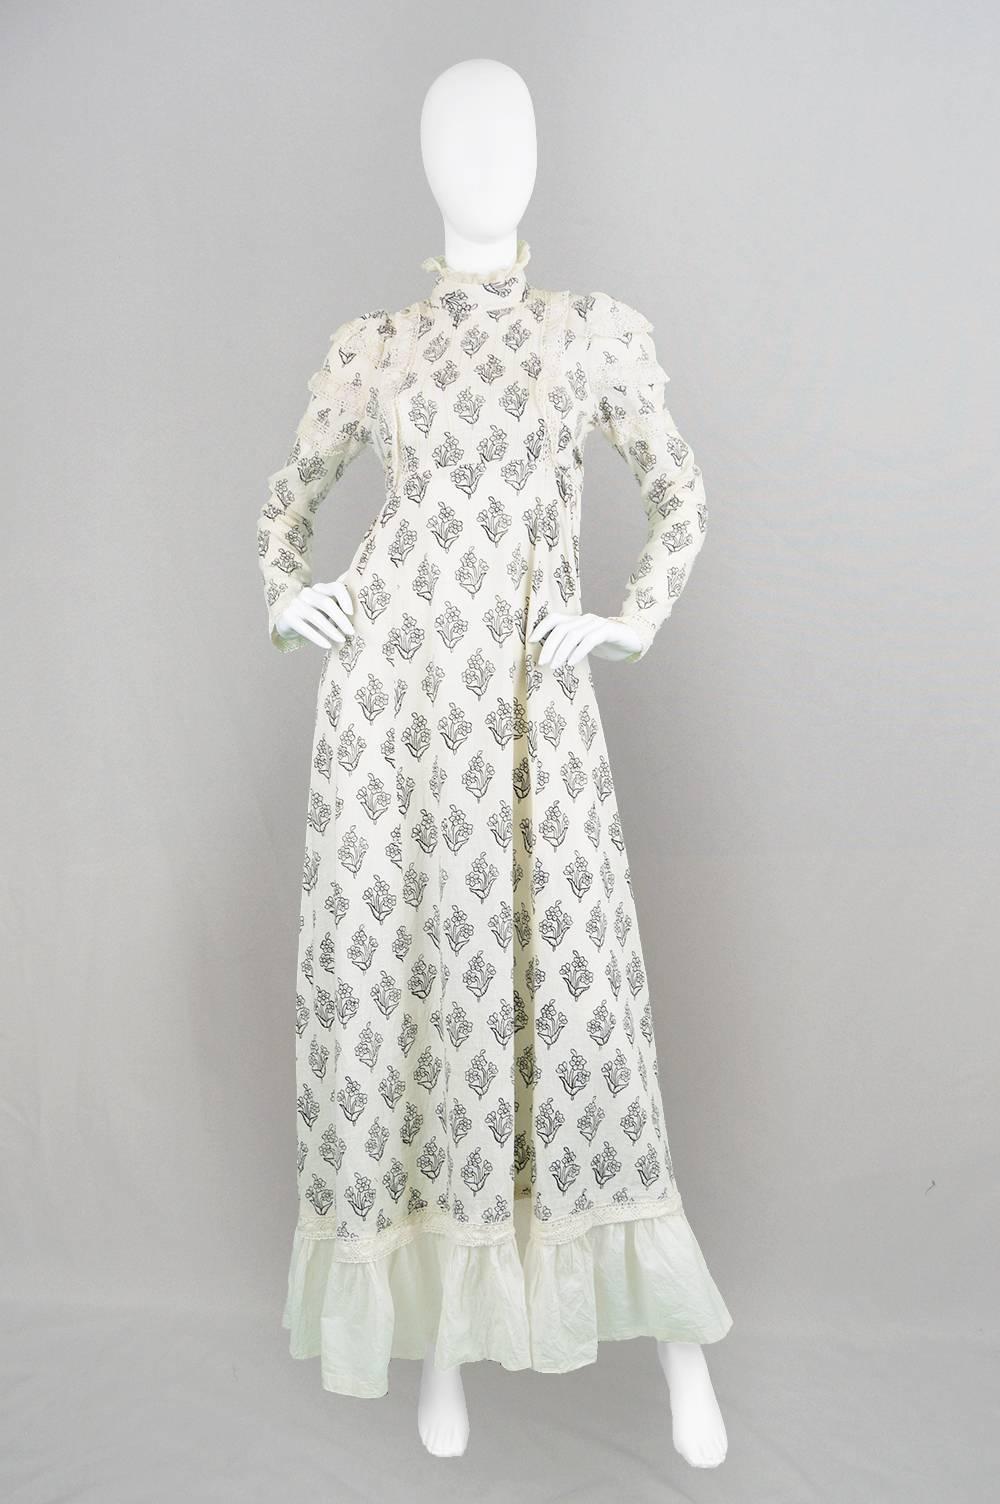 An incredible and highly collectible vintage bohemian dress by Carnaby Street label, London Mob - a huge player in the British boutique scene of the late 60s and early 70s. With its high neck, highlighted by a crochet trim, long, slender sleeves